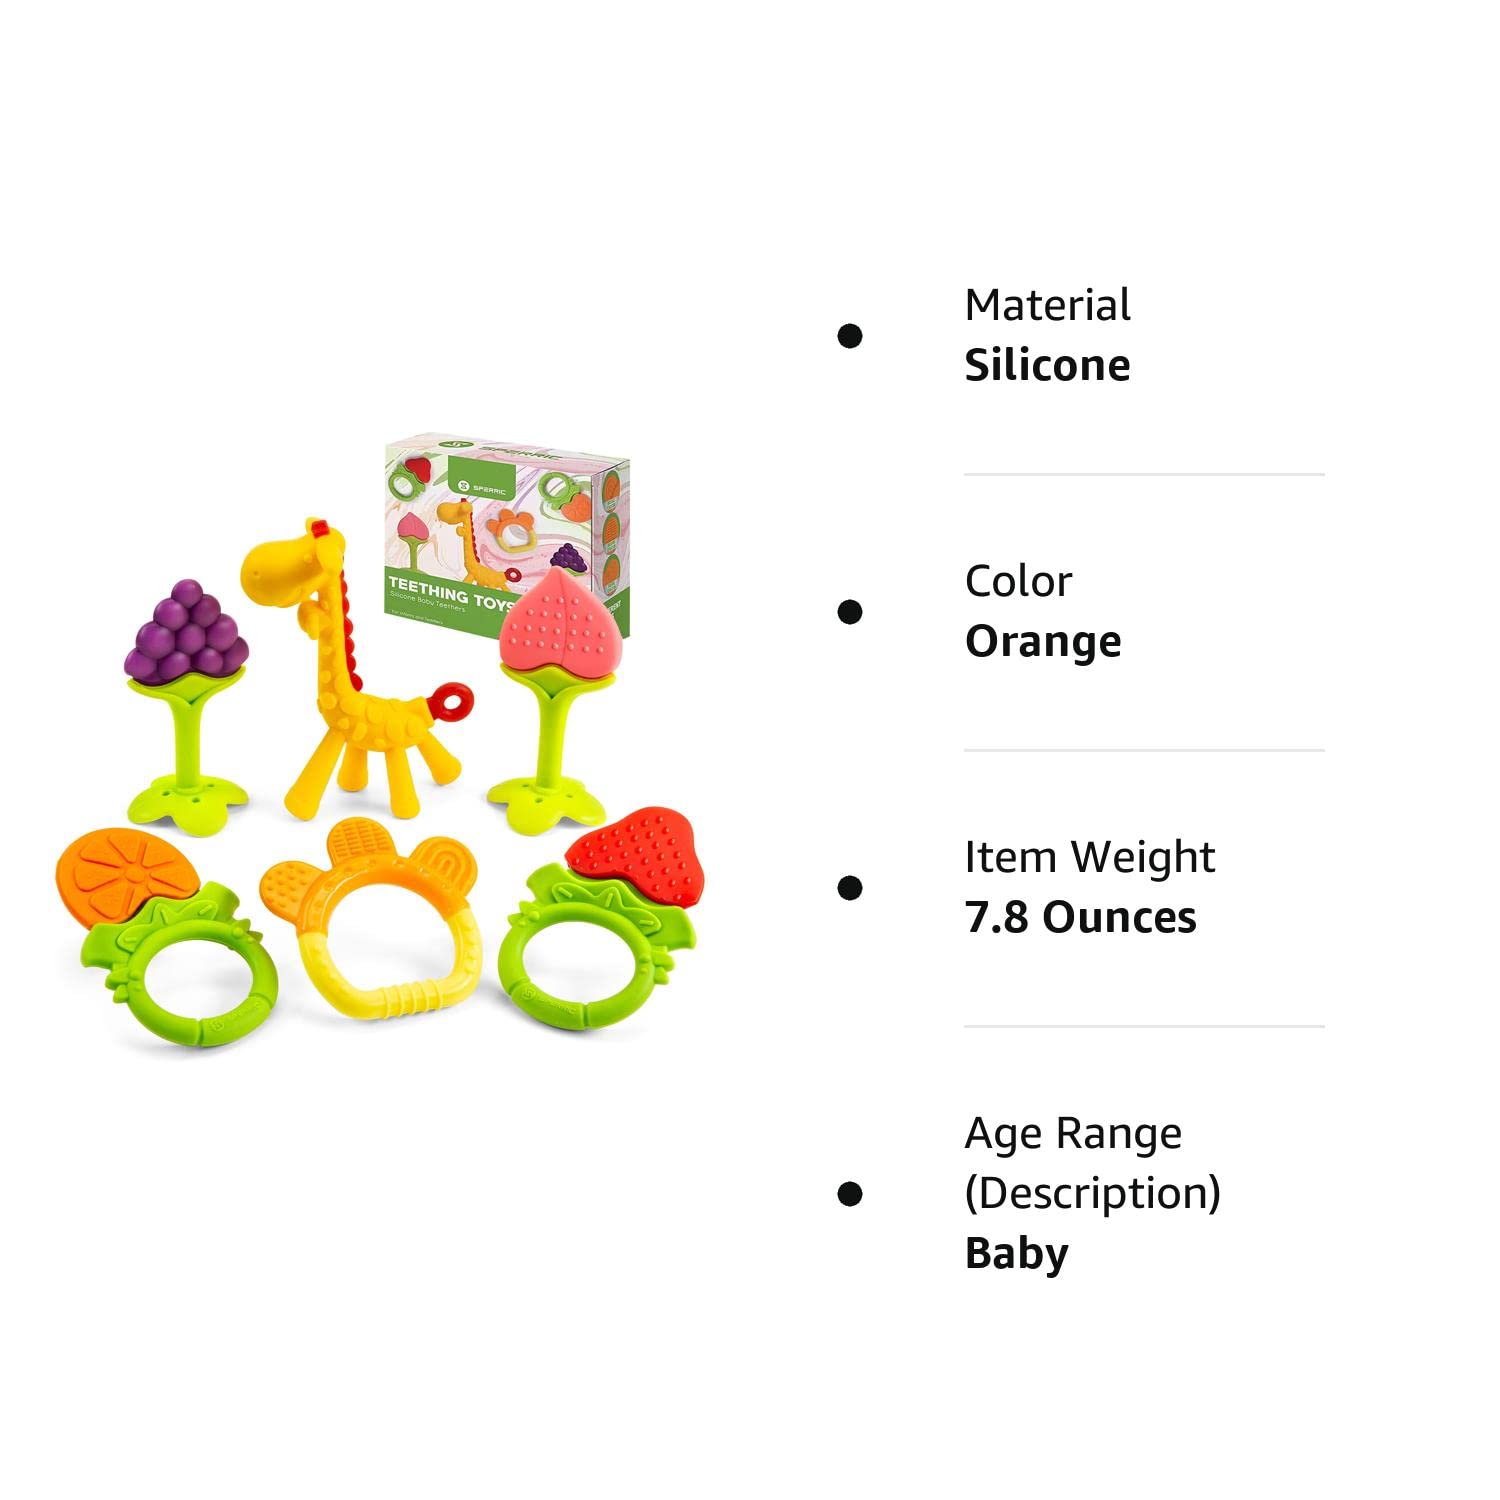 Fisher-Price Baby 6-Pack Infant Spoons